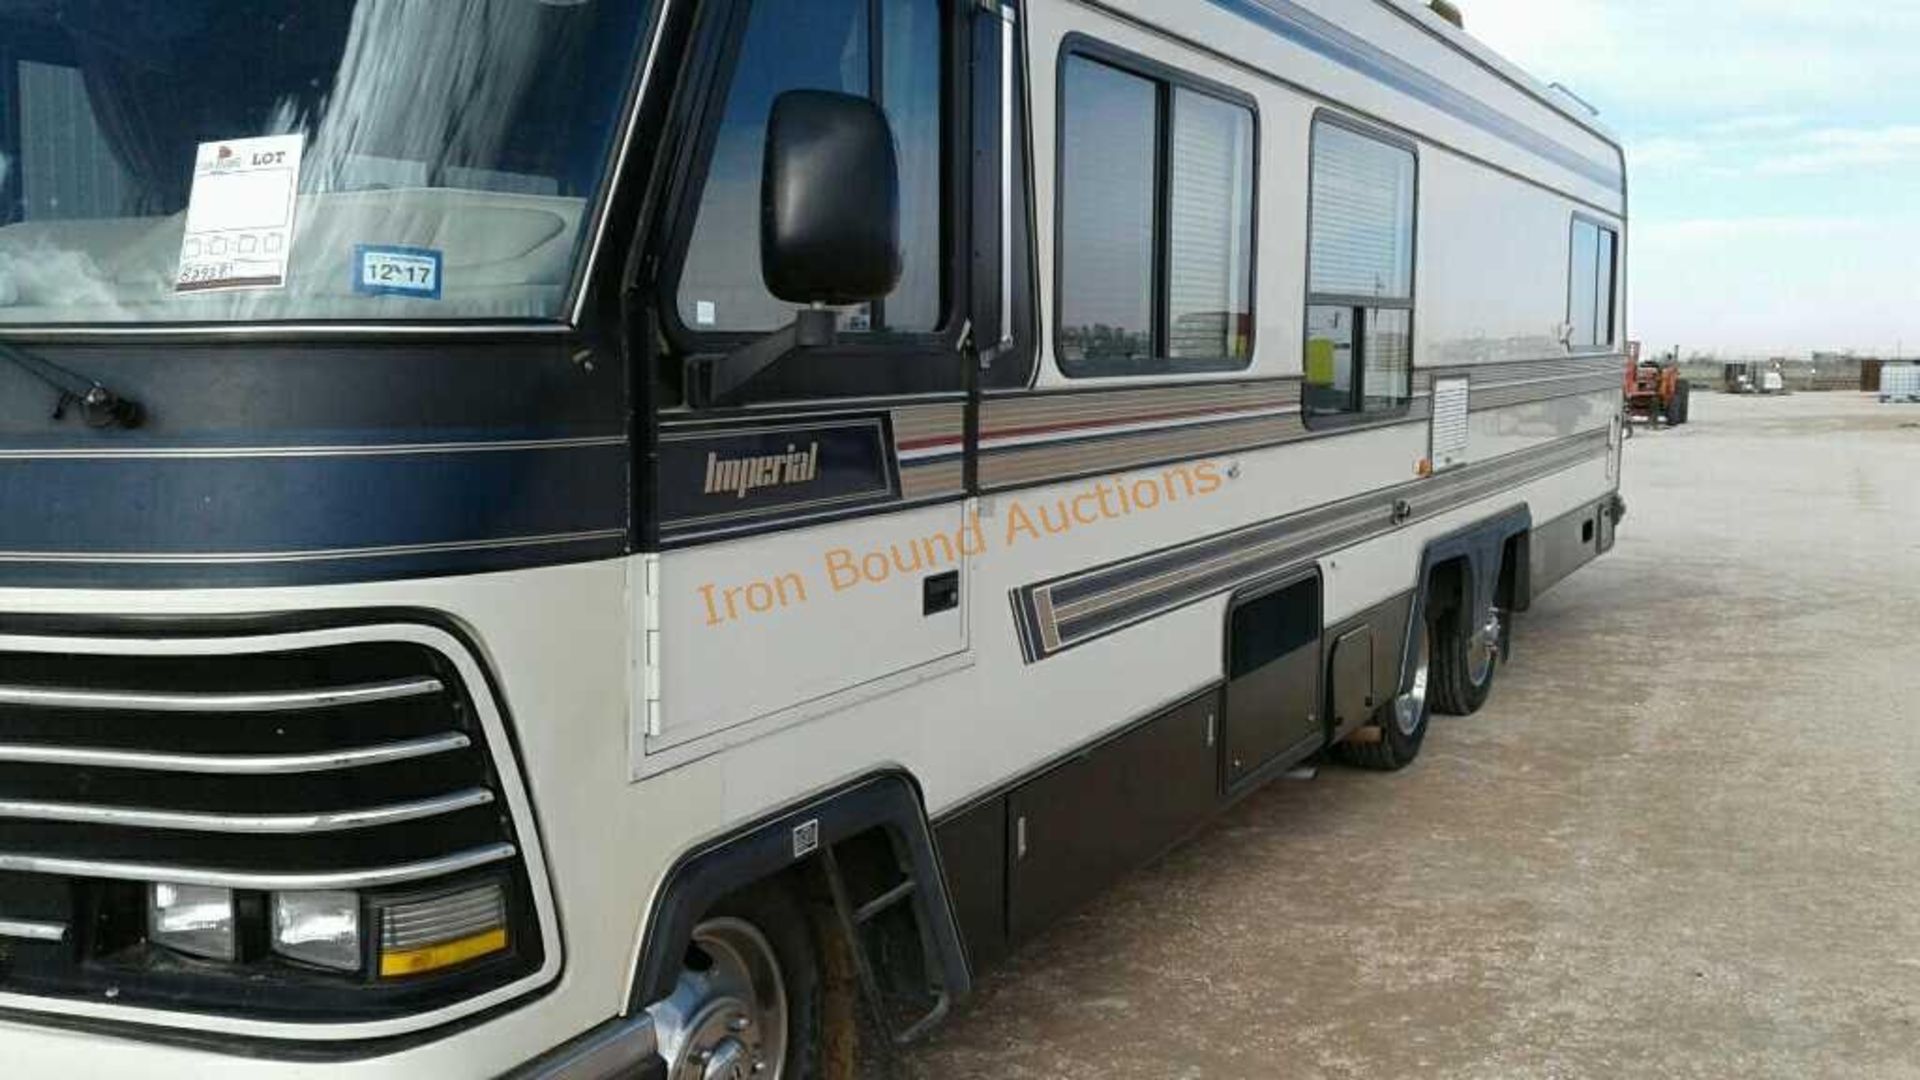 1989 Holiday Rambler Imperial Motorhome - Image 9 of 25